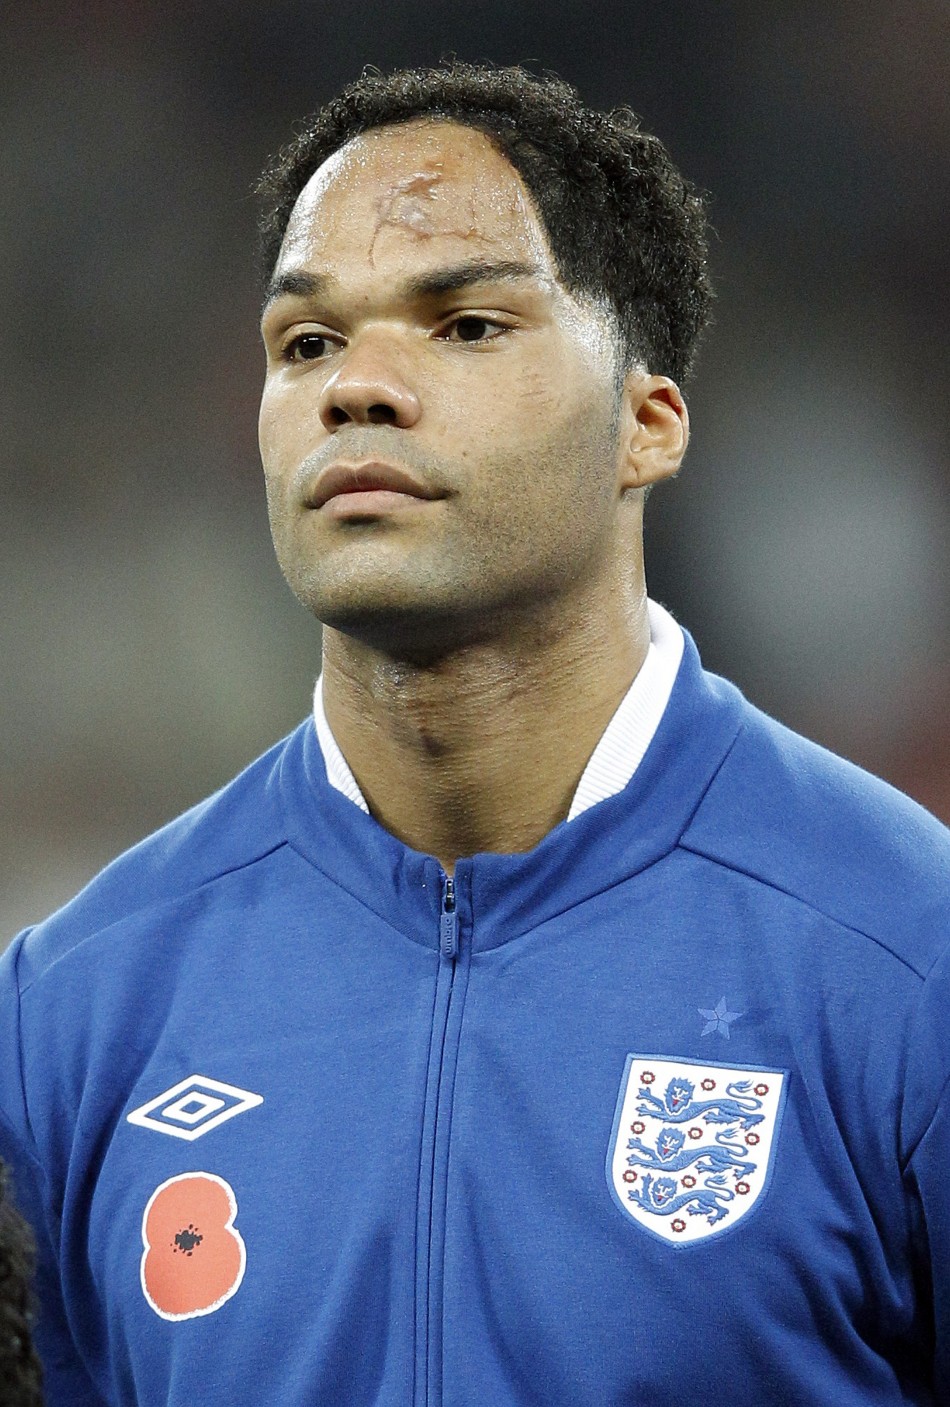 Englands Lescott lines up for the national anthems before their international friendly soccer match against Spain in London